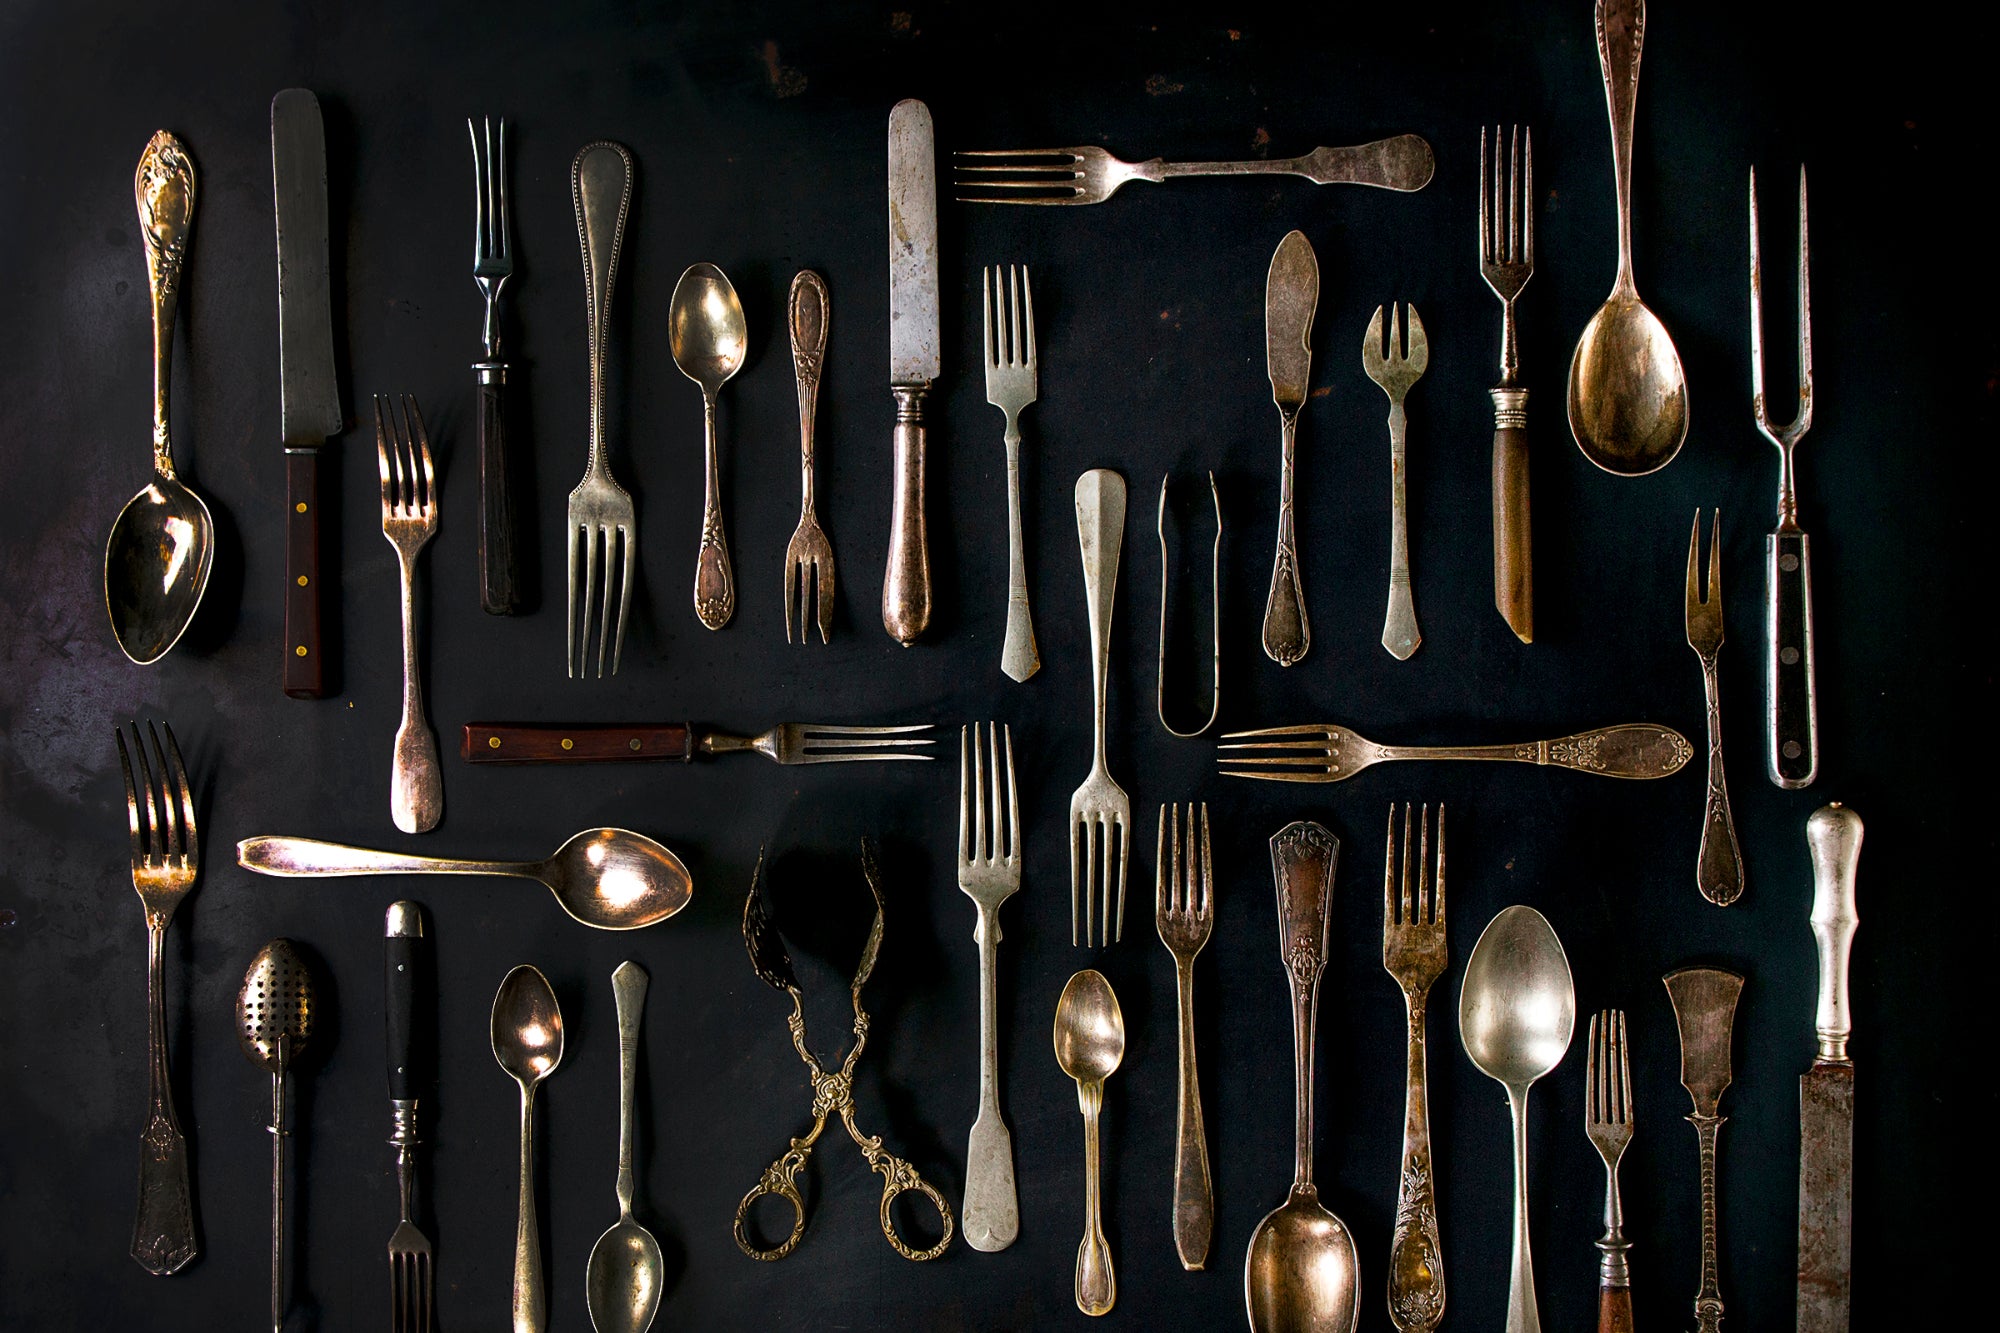 Struggling With Change? Take a Lesson From These Weird Little Forks